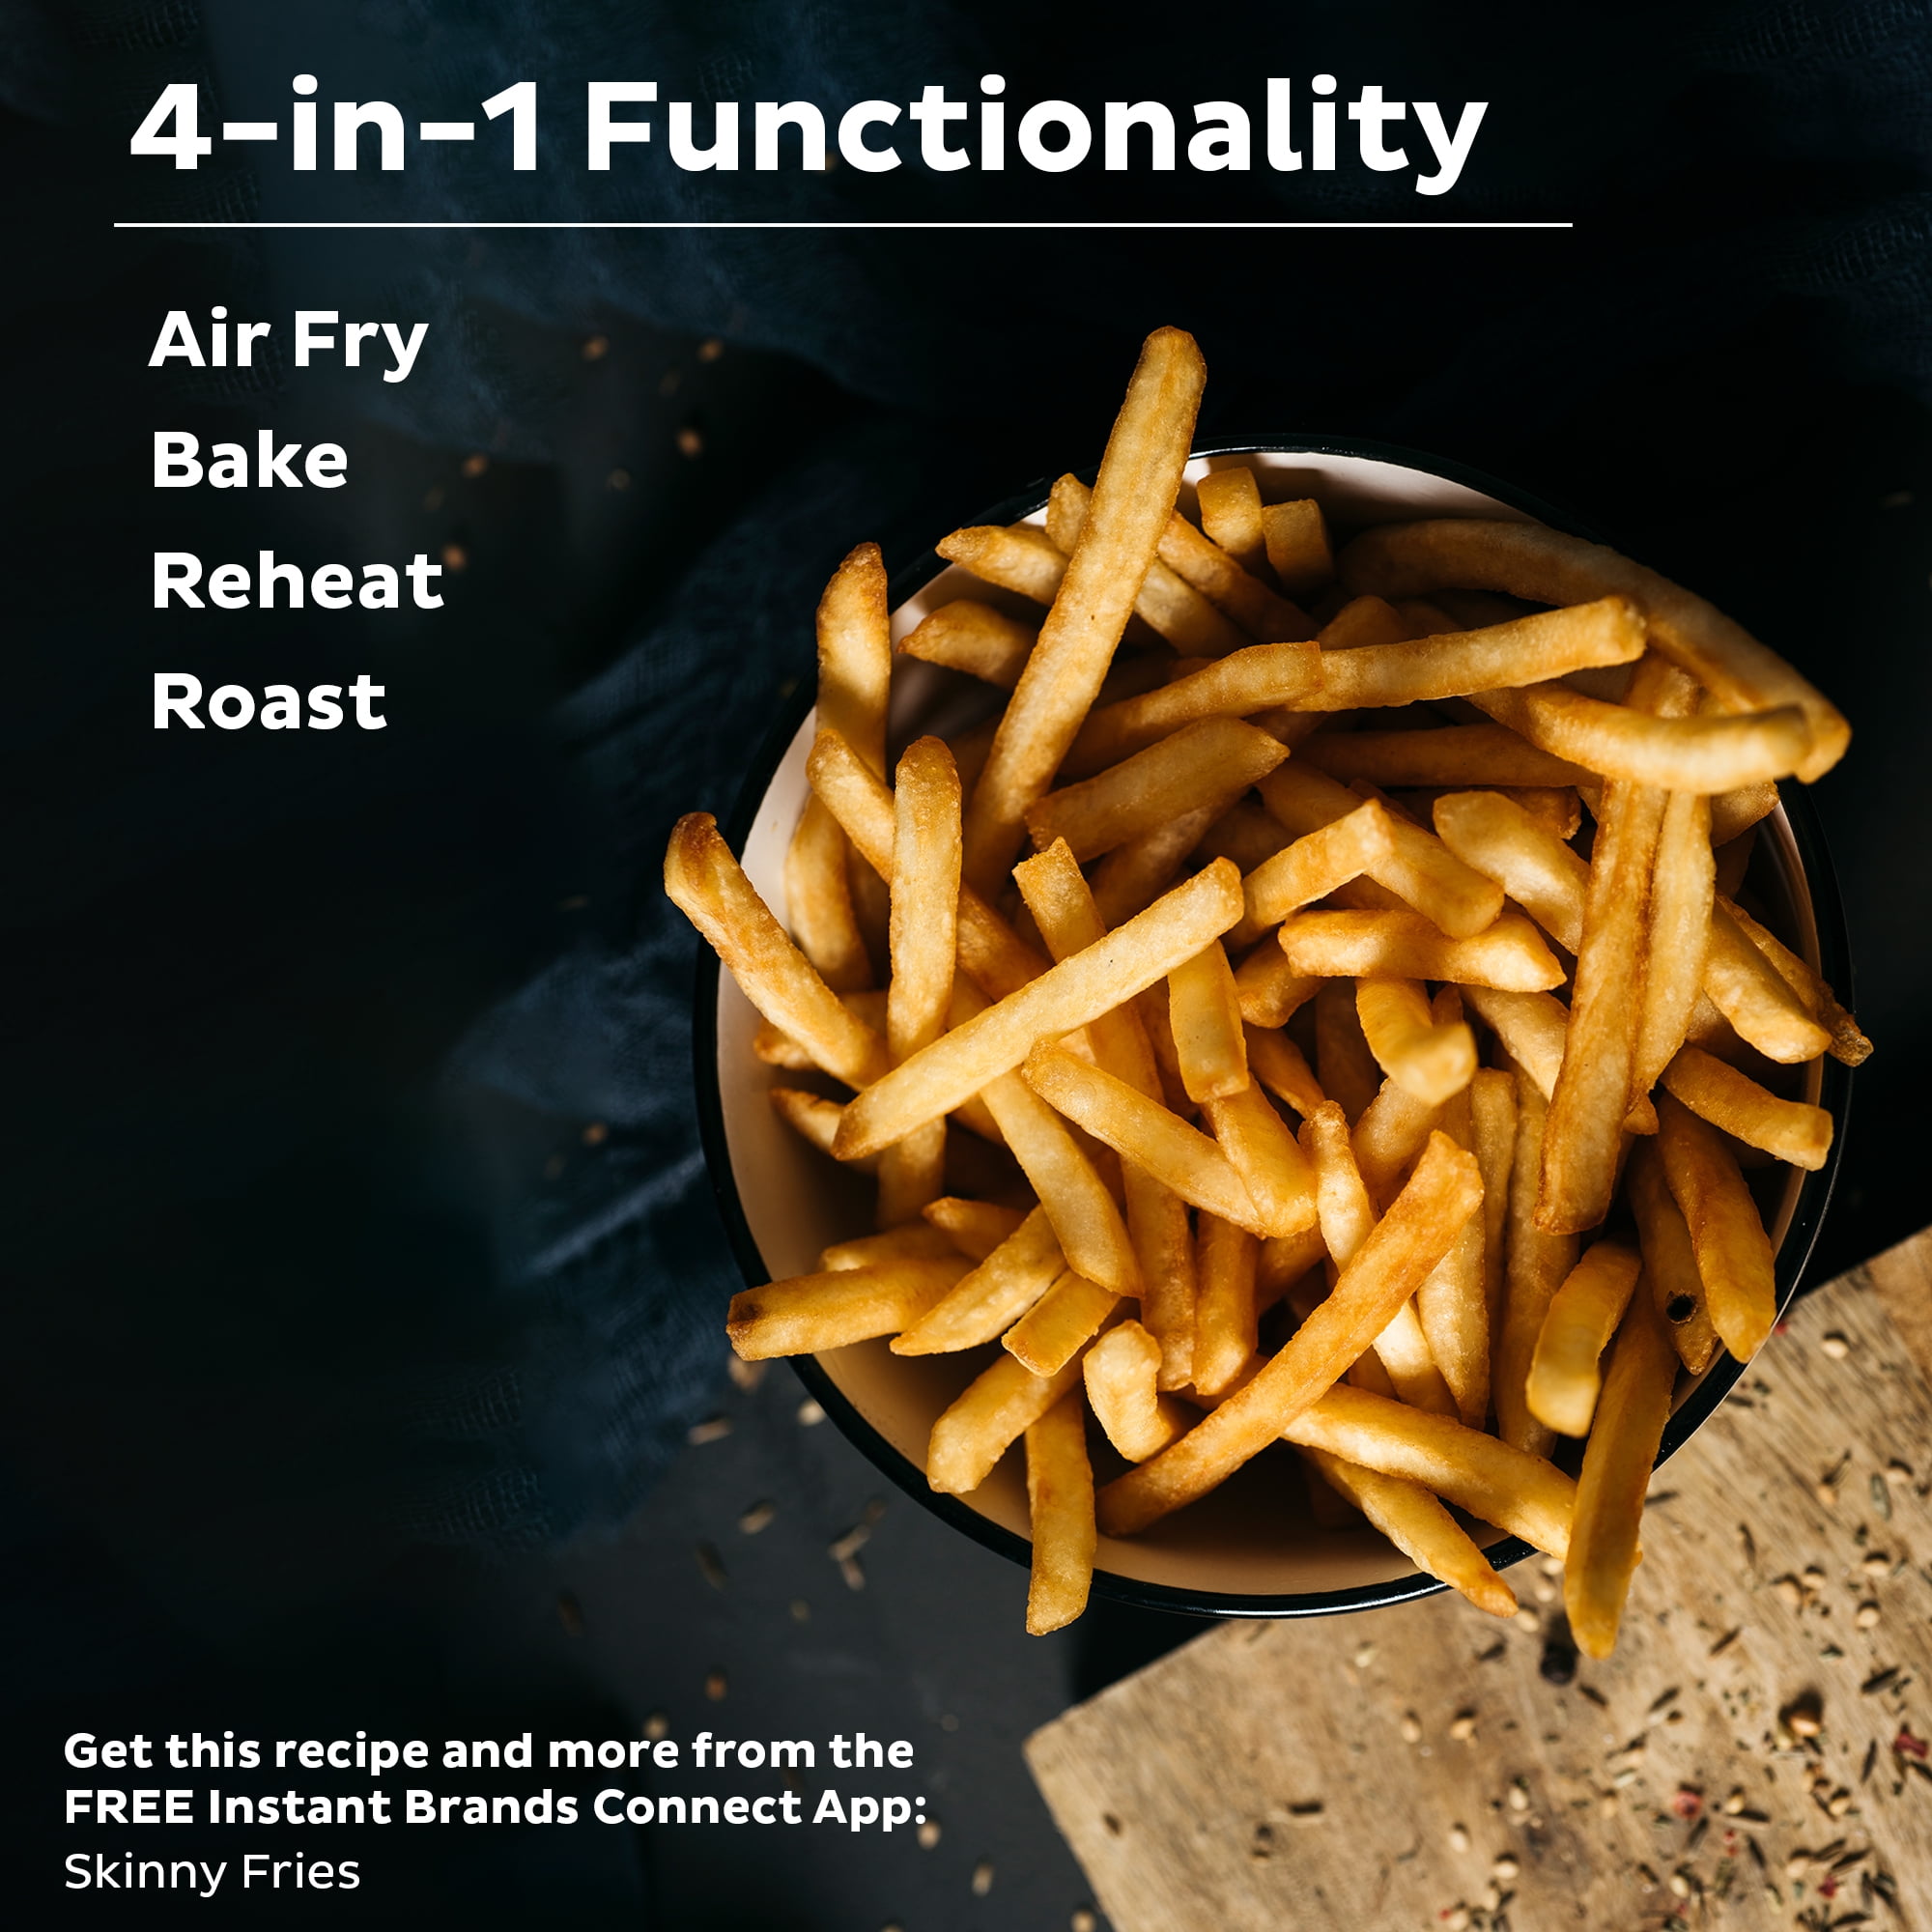 Instant 4-in-1, 2-QT Mini Air Fryer Oven Combo, From the Makers of